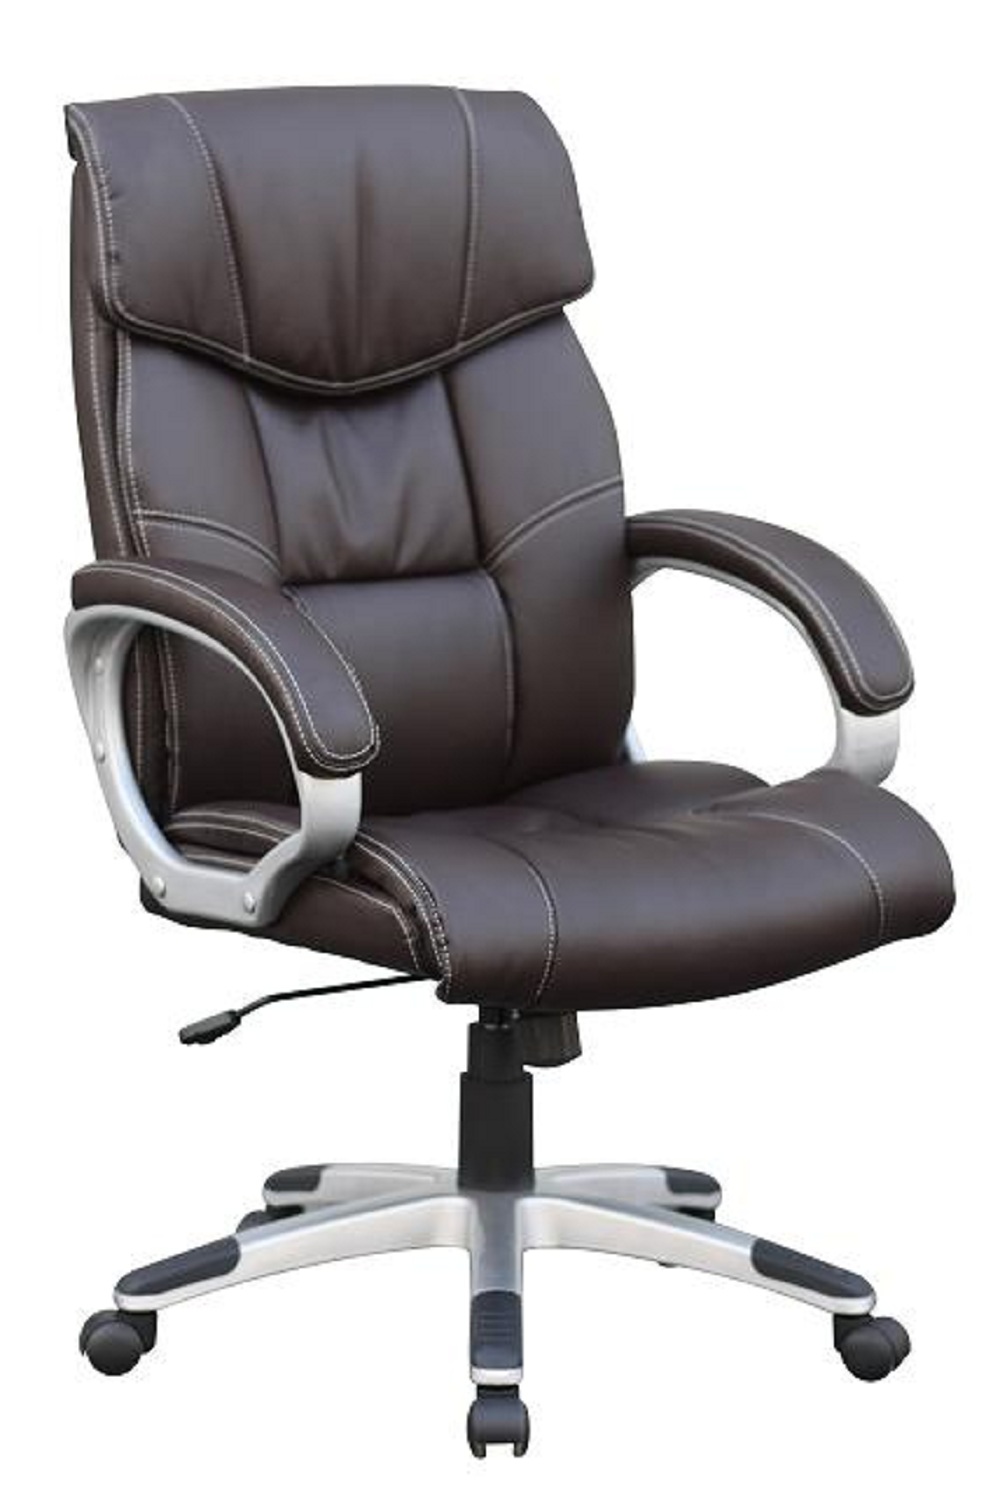 LEATHER OFFICE PADDED CHAIR SWIVEL COMPUTER DESK OFFICE ...